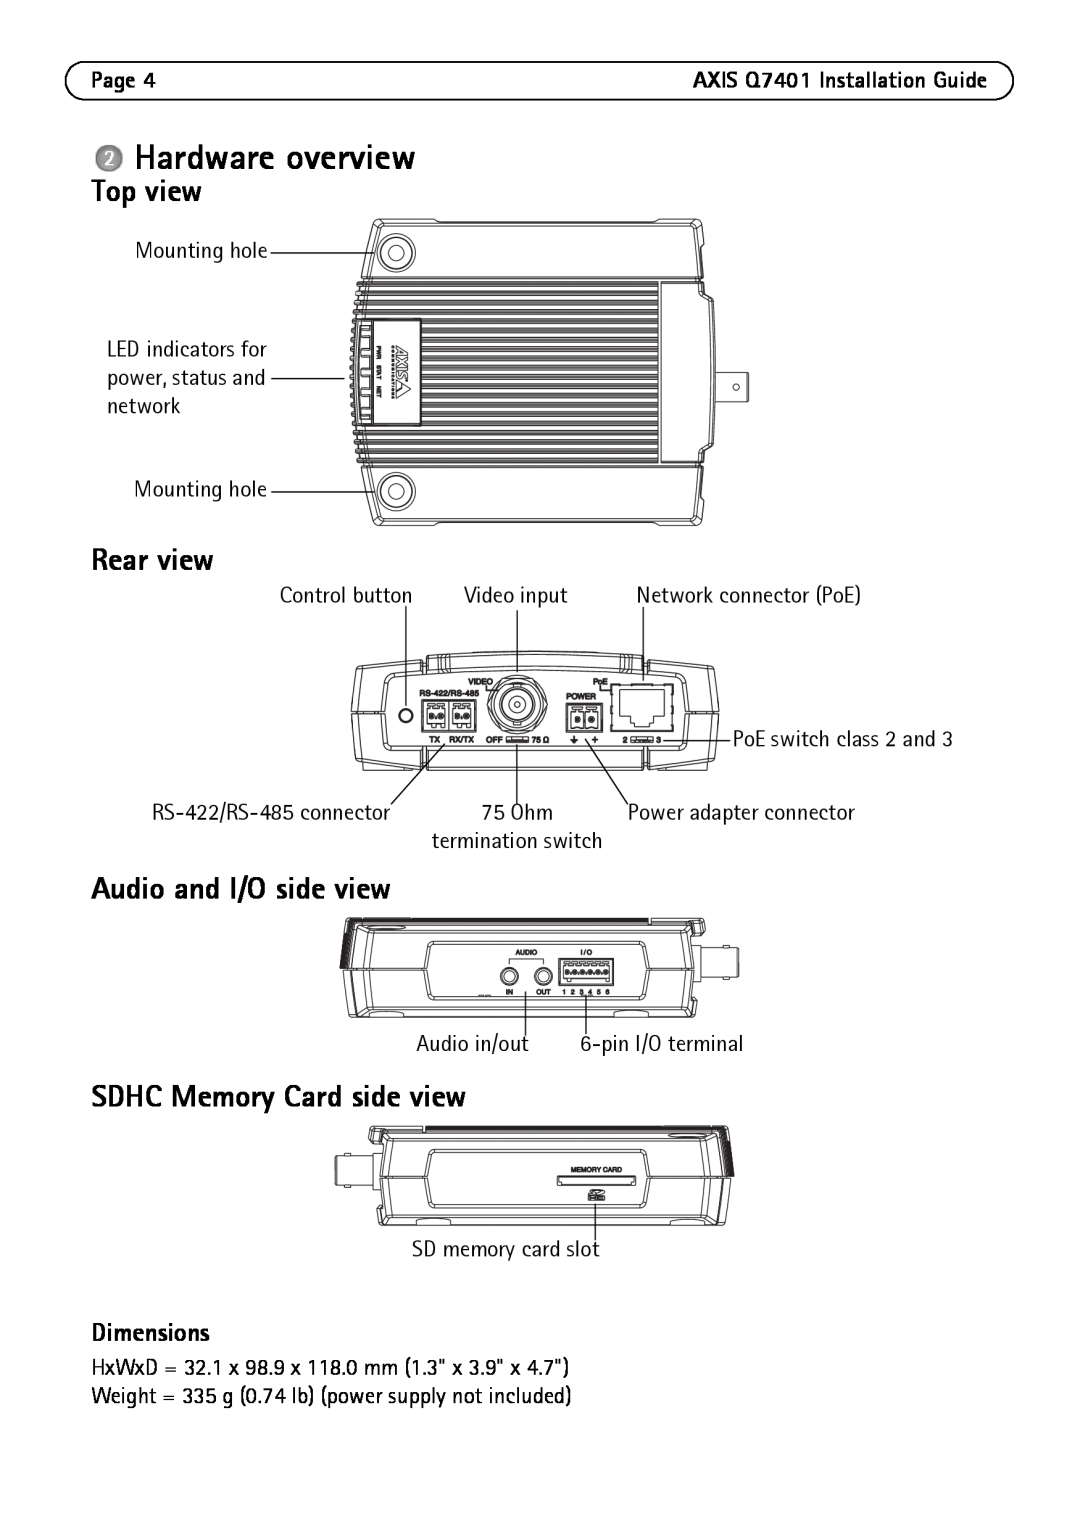 Axis Communications Q7401 Hardware overview, Top view, Rear view, Audio and I/O side view, SDHC Memory Card side view 